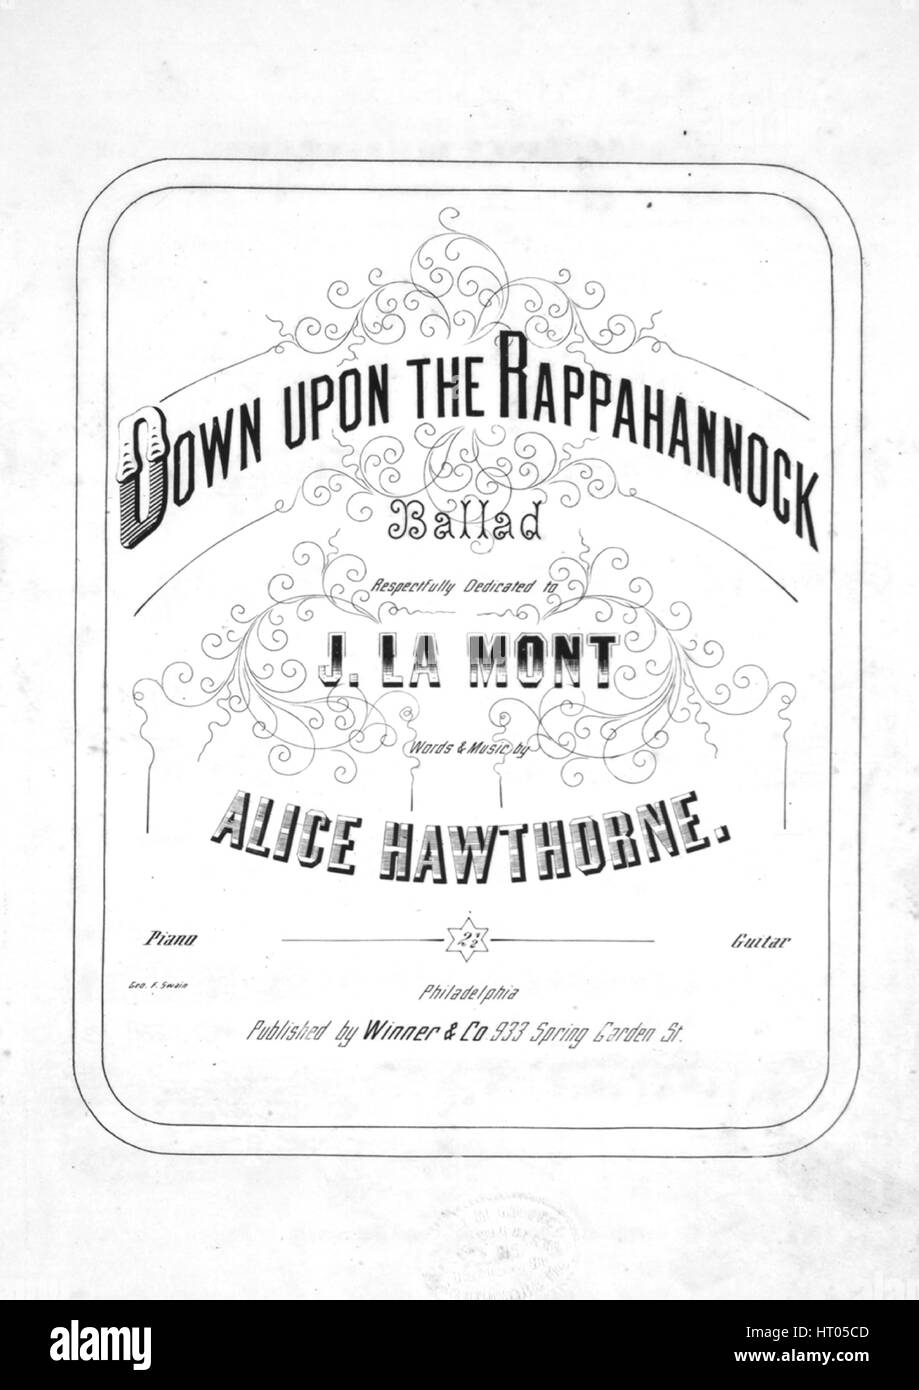 Sheet music cover image of the song 'Down Upon the Rappahannock Ballad', with original authorship notes reading 'Words and Music by Alice Hawthorne', United States, 1863. The publisher is listed as 'Winner and Co., 933 Spring Garden St.', the form of composition is 'strophic with chorus', the instrumentation is 'piano and voice', the first line reads 'Down upon the Rappahannock, lies the noble volunteer', and the illustration artist is listed as 'Geo. F. Swain'. Stock Photo